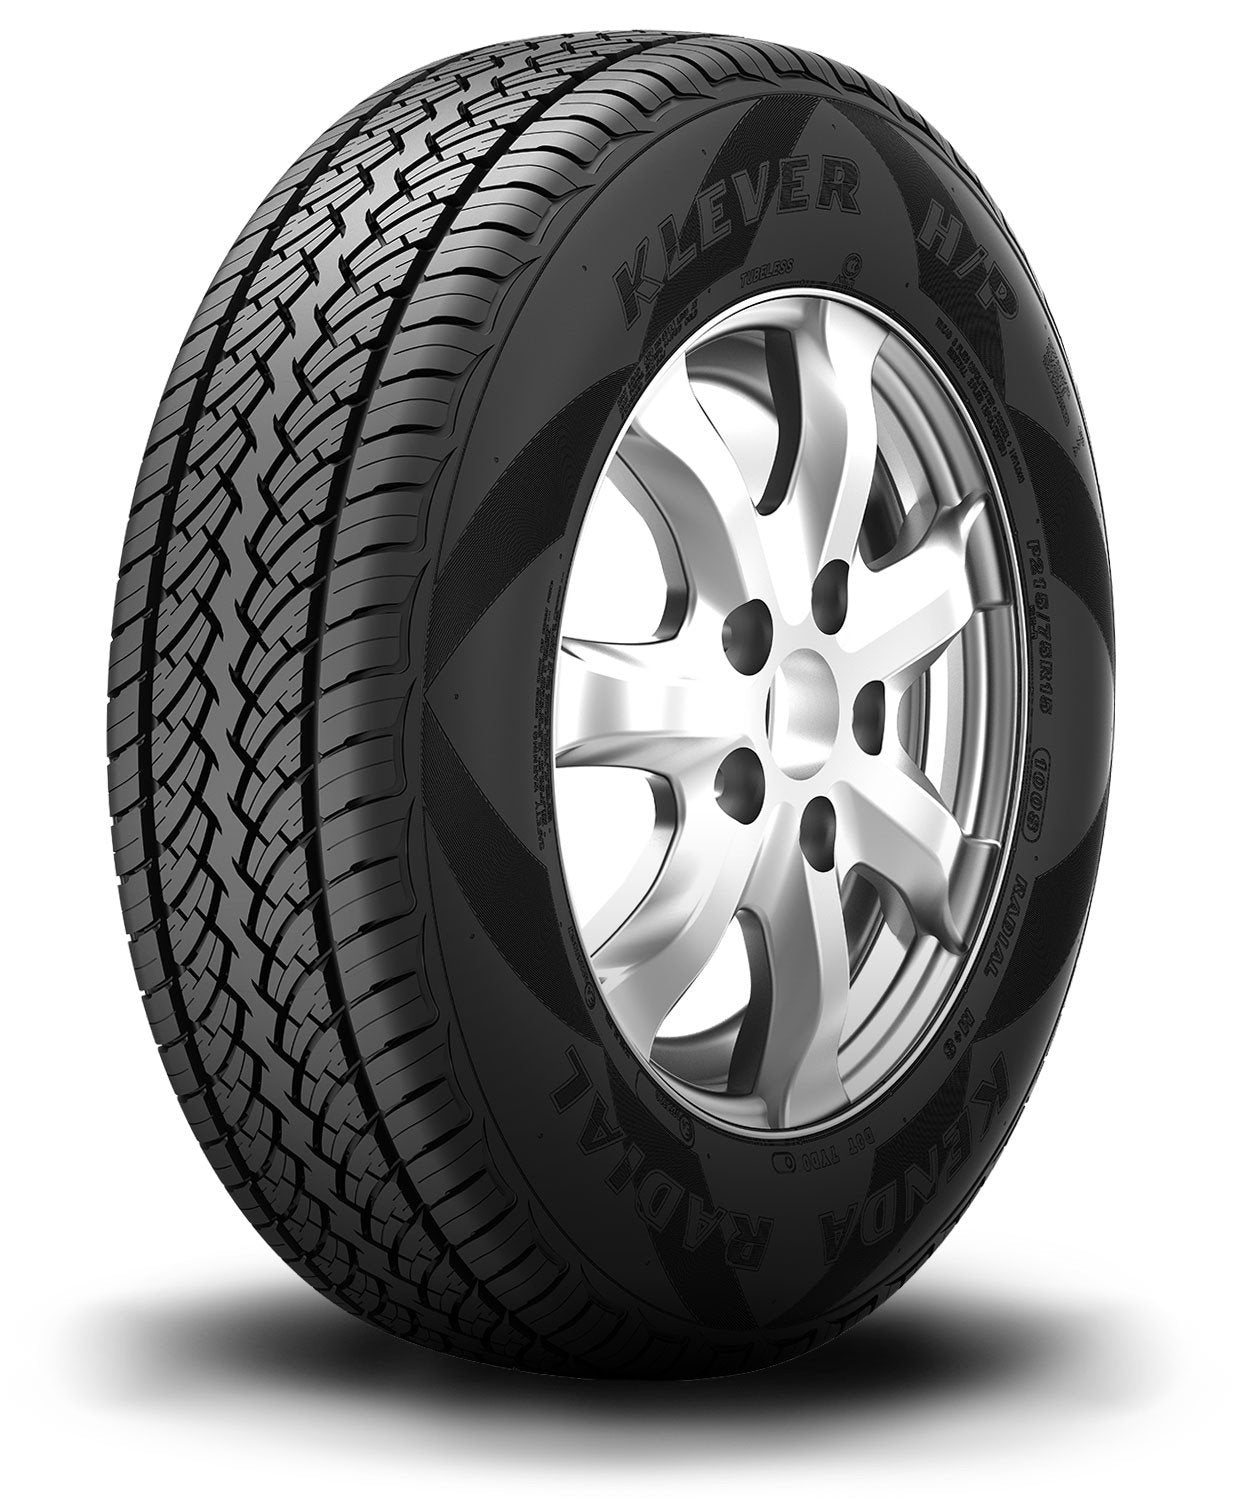 NEW 255/70R16 Kenda KLEVER HP KR15 109S BK - Tires and Engine Performance